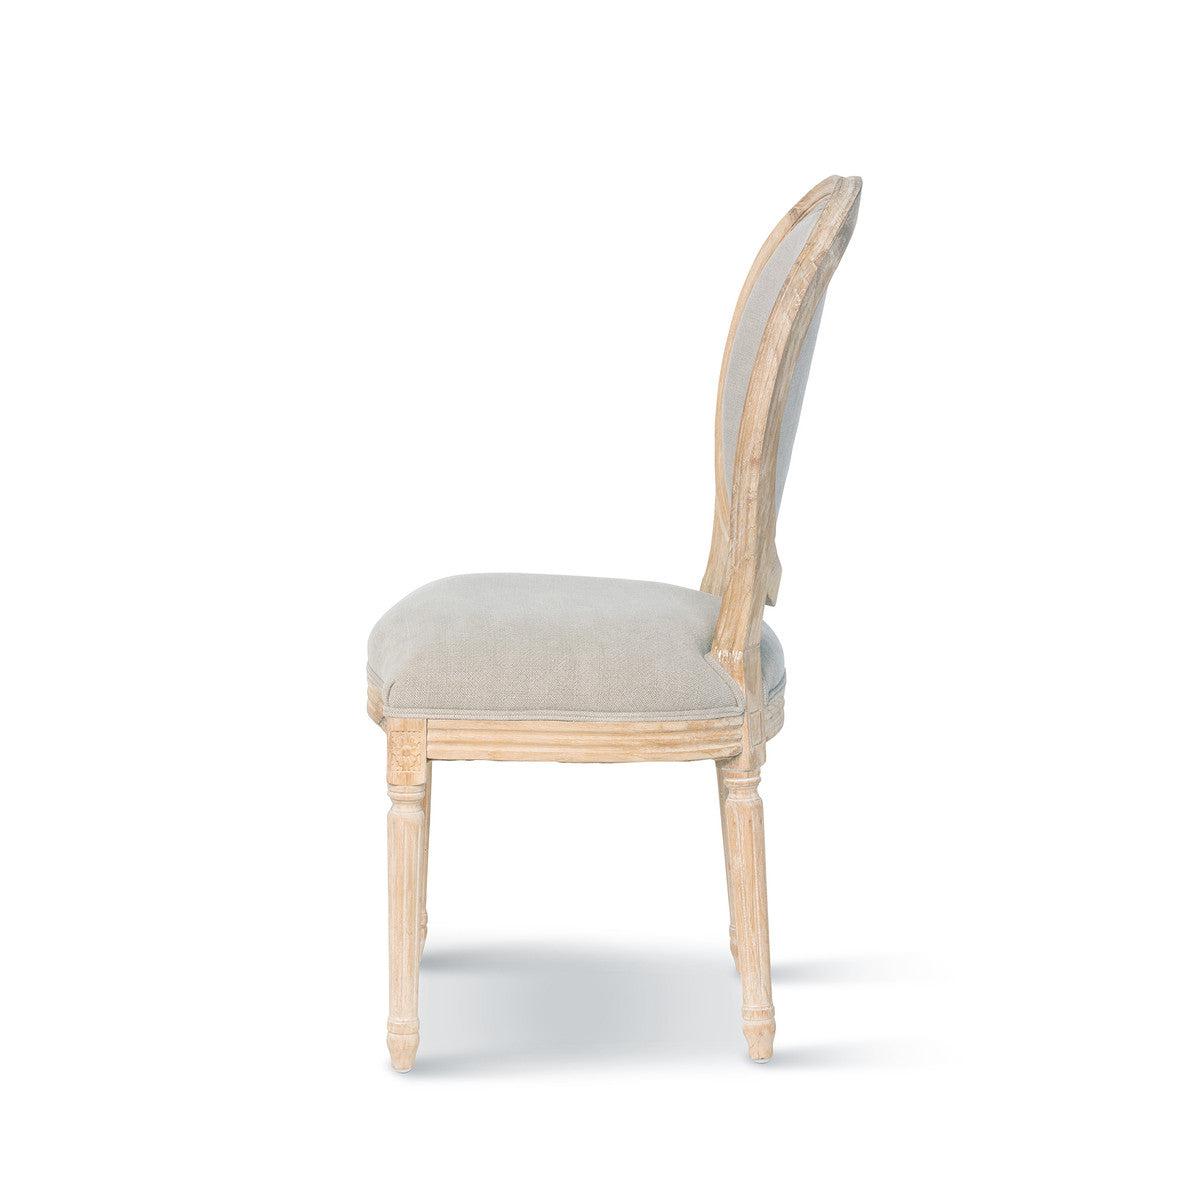 the-whitney-dining-chair-dining-chair-park-hill-6-Threadbare Gypsy Soul